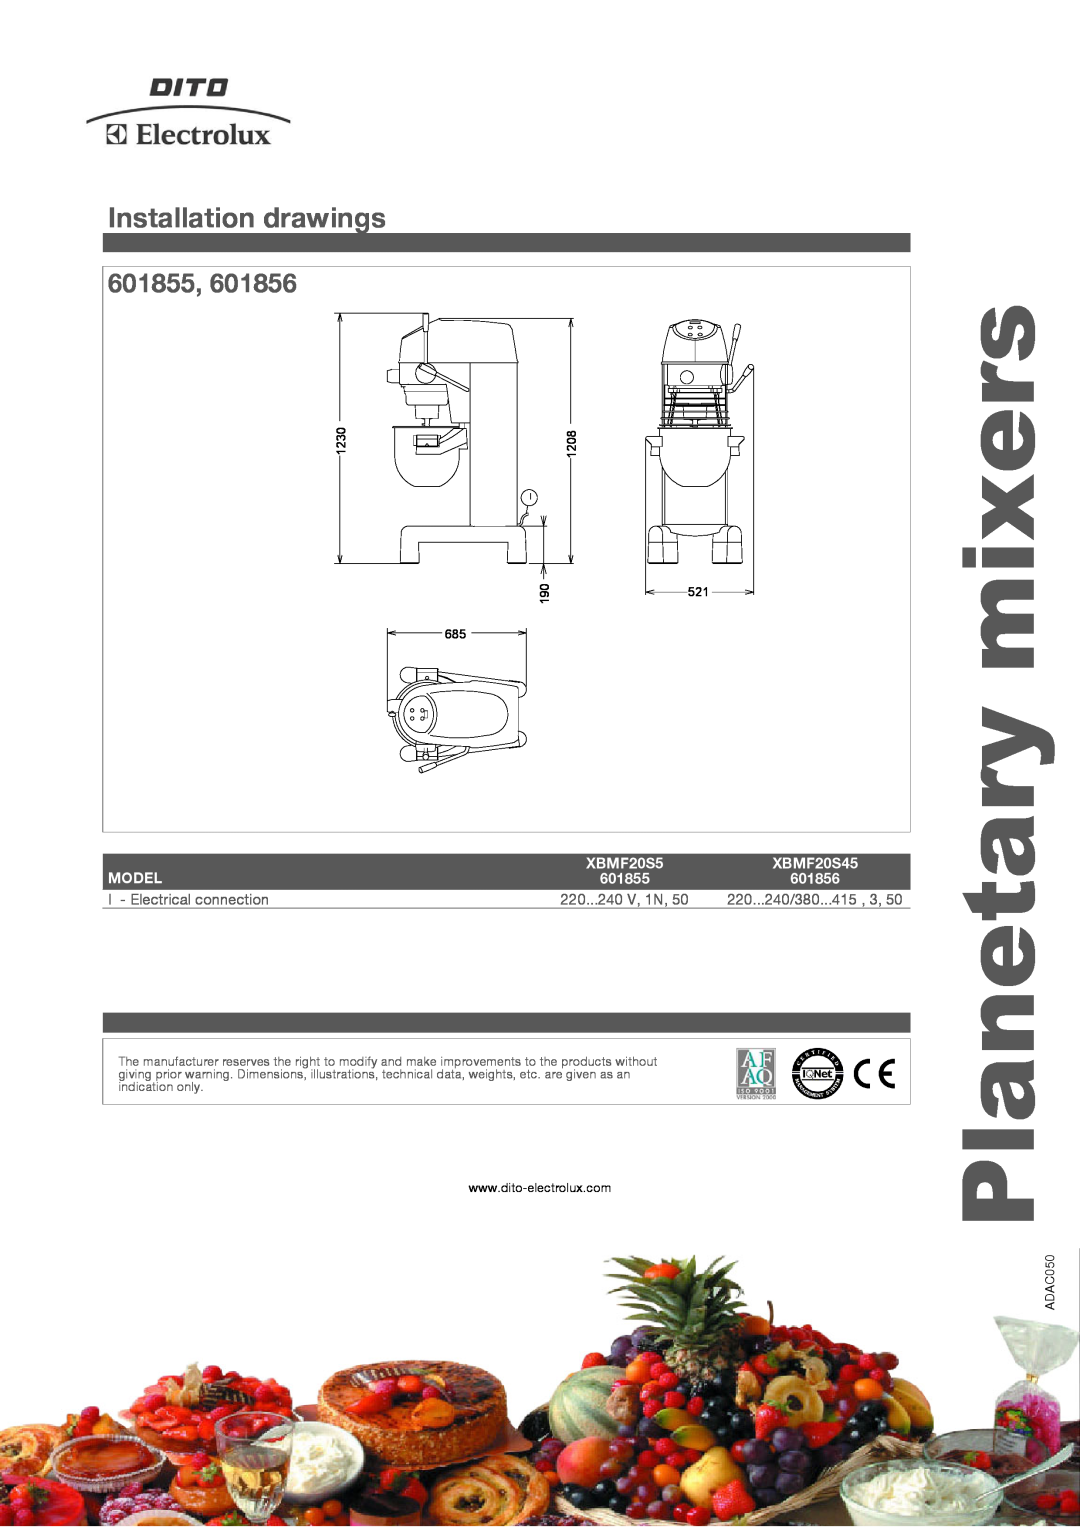 Electrolux XBMF20S5 manual Installation drawings, 601855, mixers, Planetary, Model, XBMF20S45, 601856 